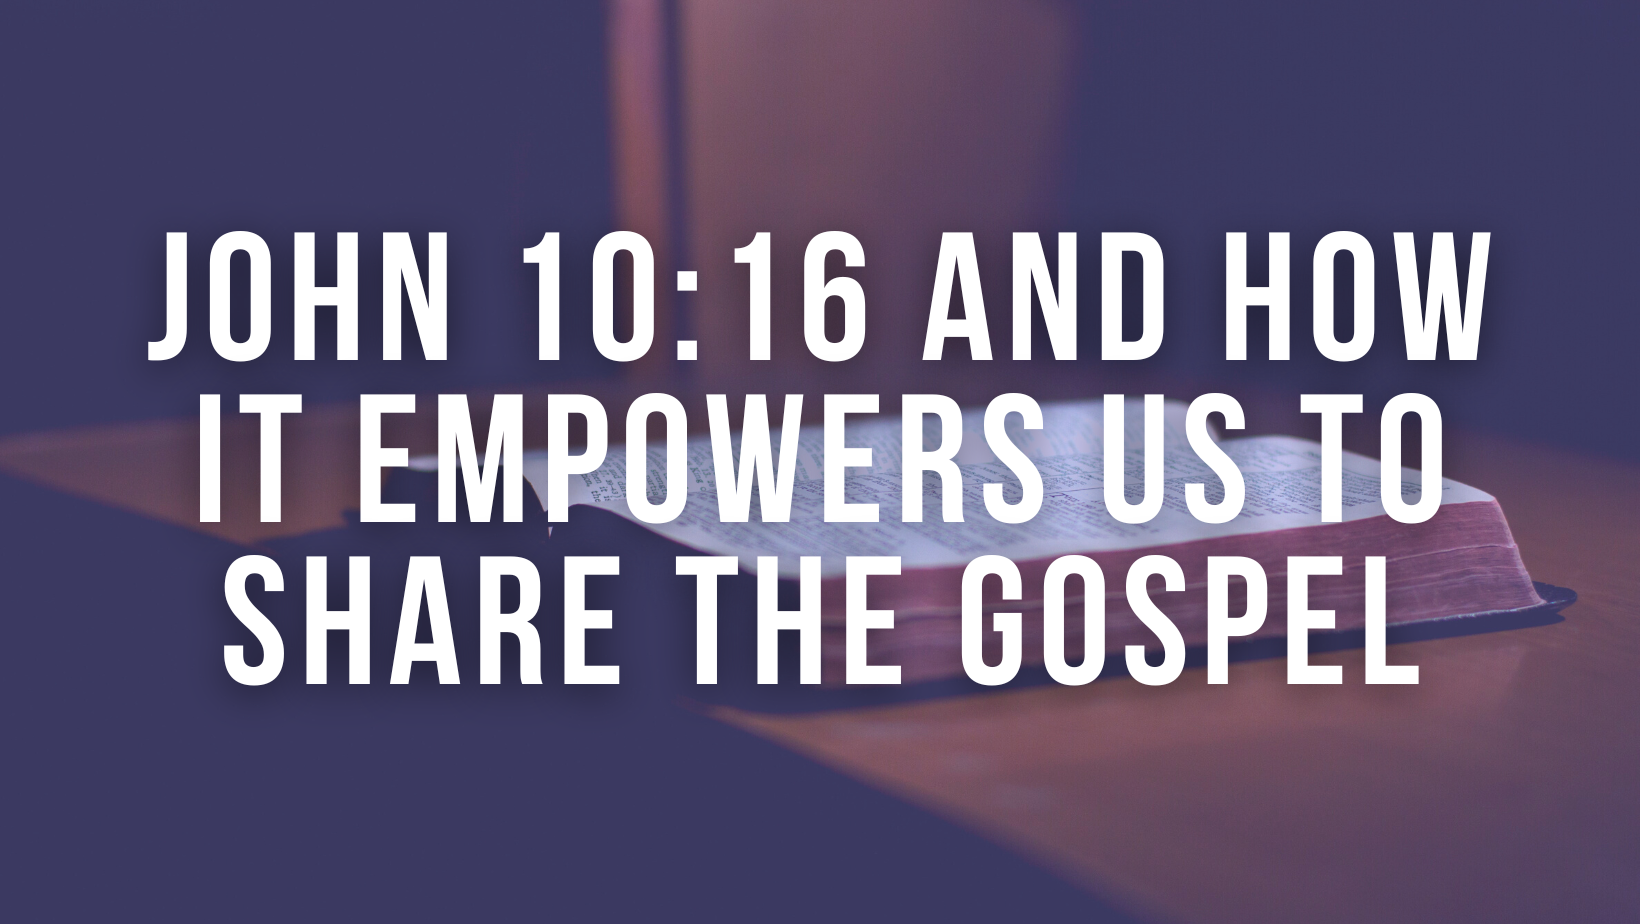 John 10:16 and how it empowers us to share the Gospel